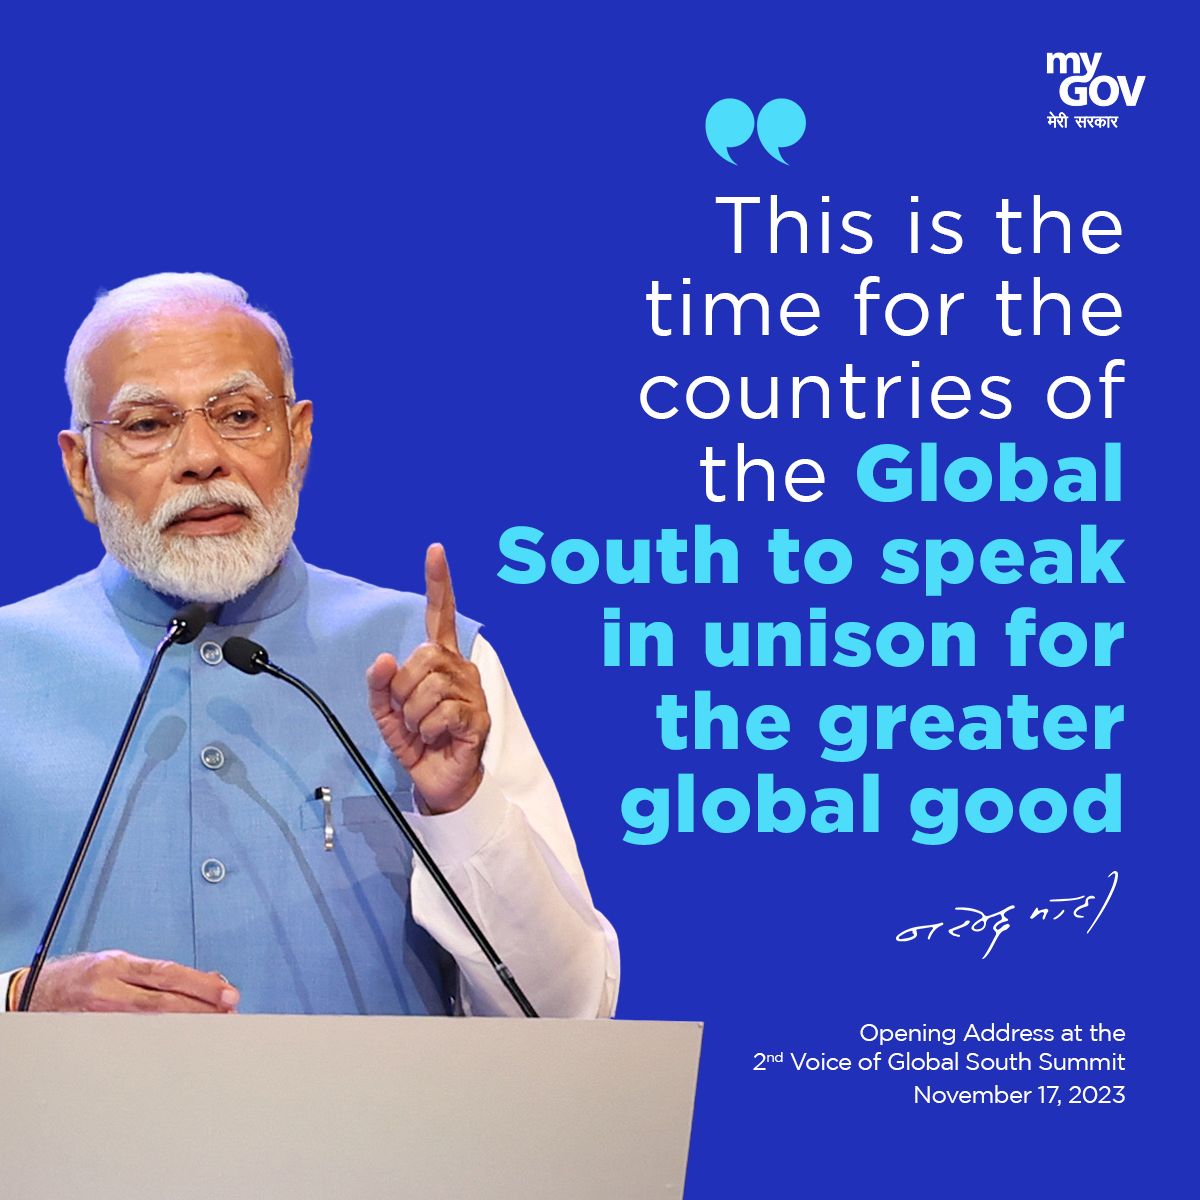 This is the time for the countries of the Global South to speak in unison for the greater global good

#VoiceOfGlobalSouth #GlobalSouthSummit